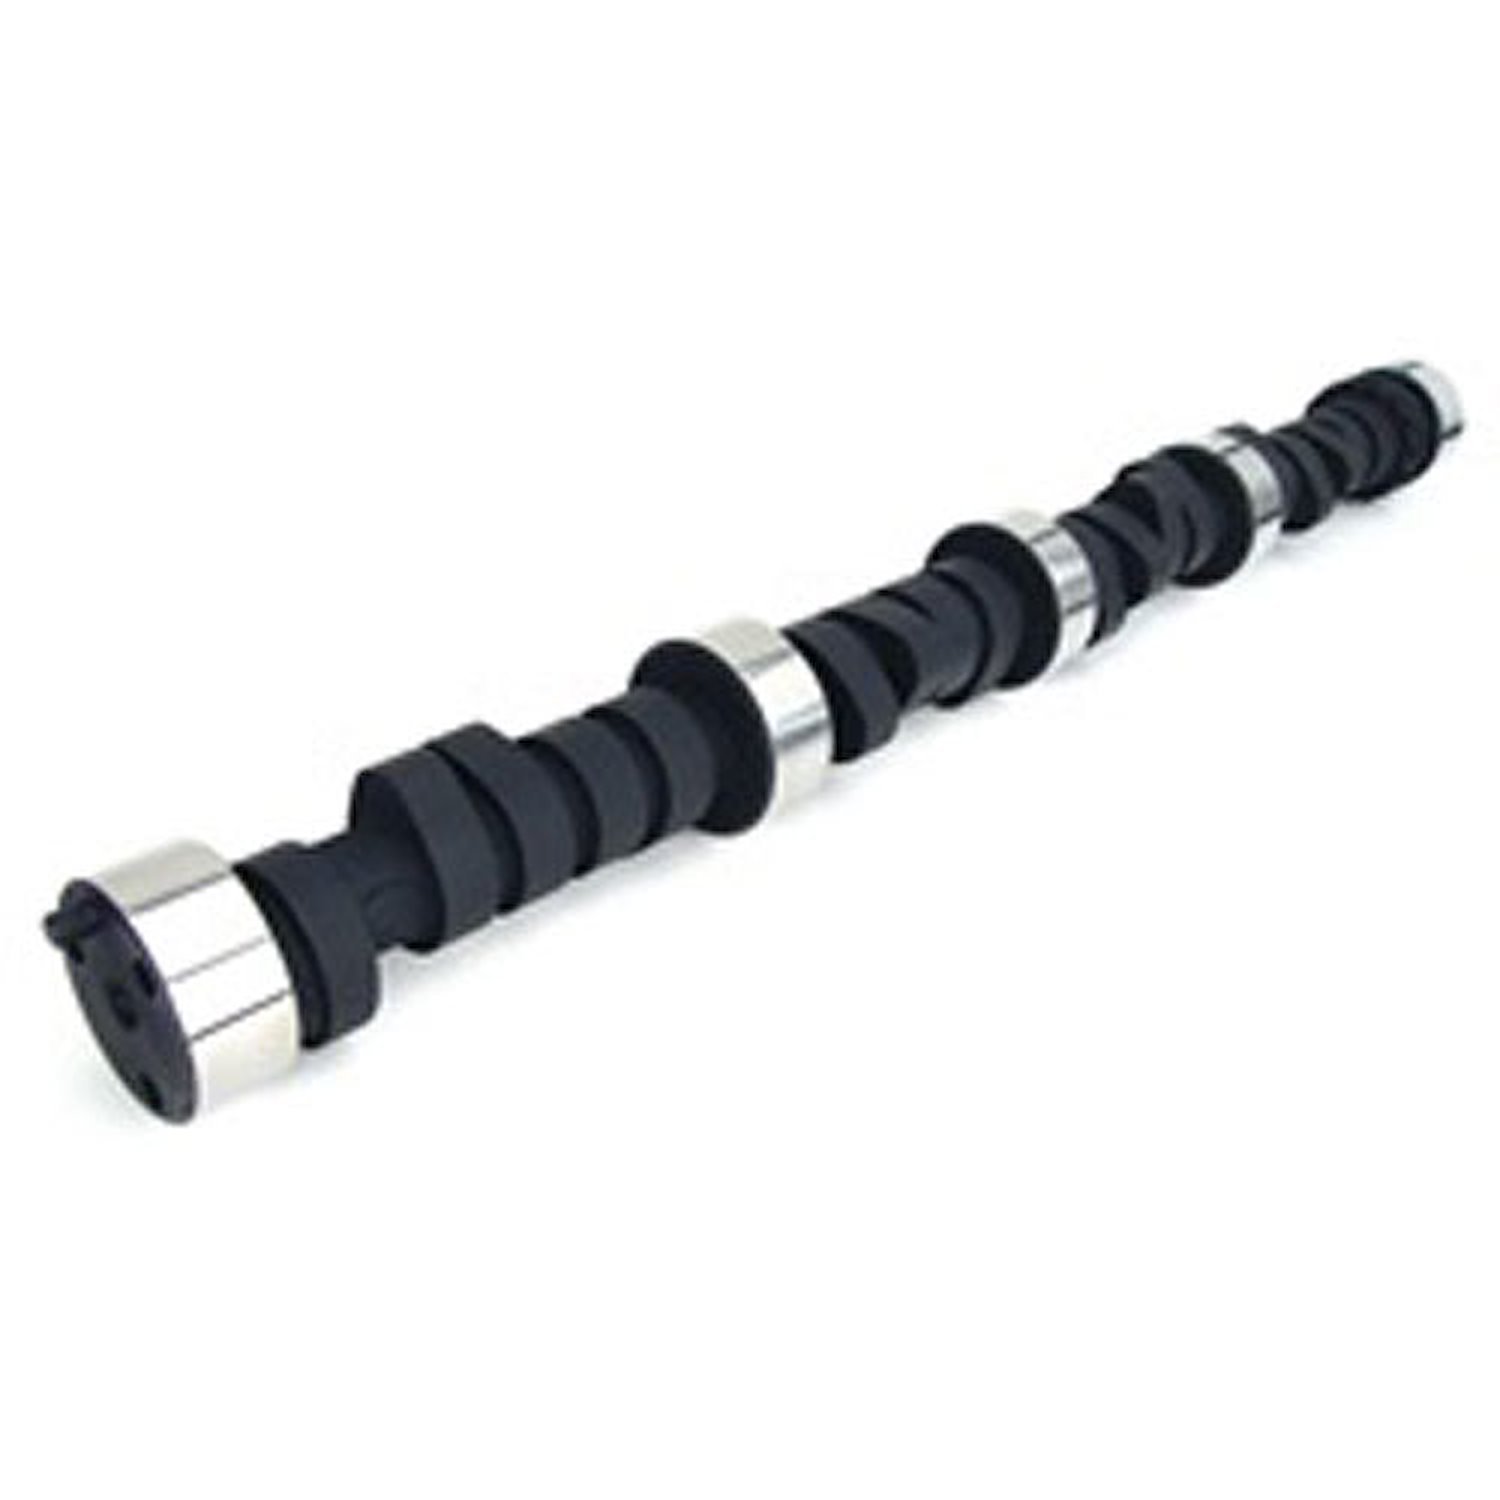 Factory Muscle Mechanical Flat Tappet Camshaft Small Block Chevy 262-400ci 1955-98 Lift: .394"/.400"